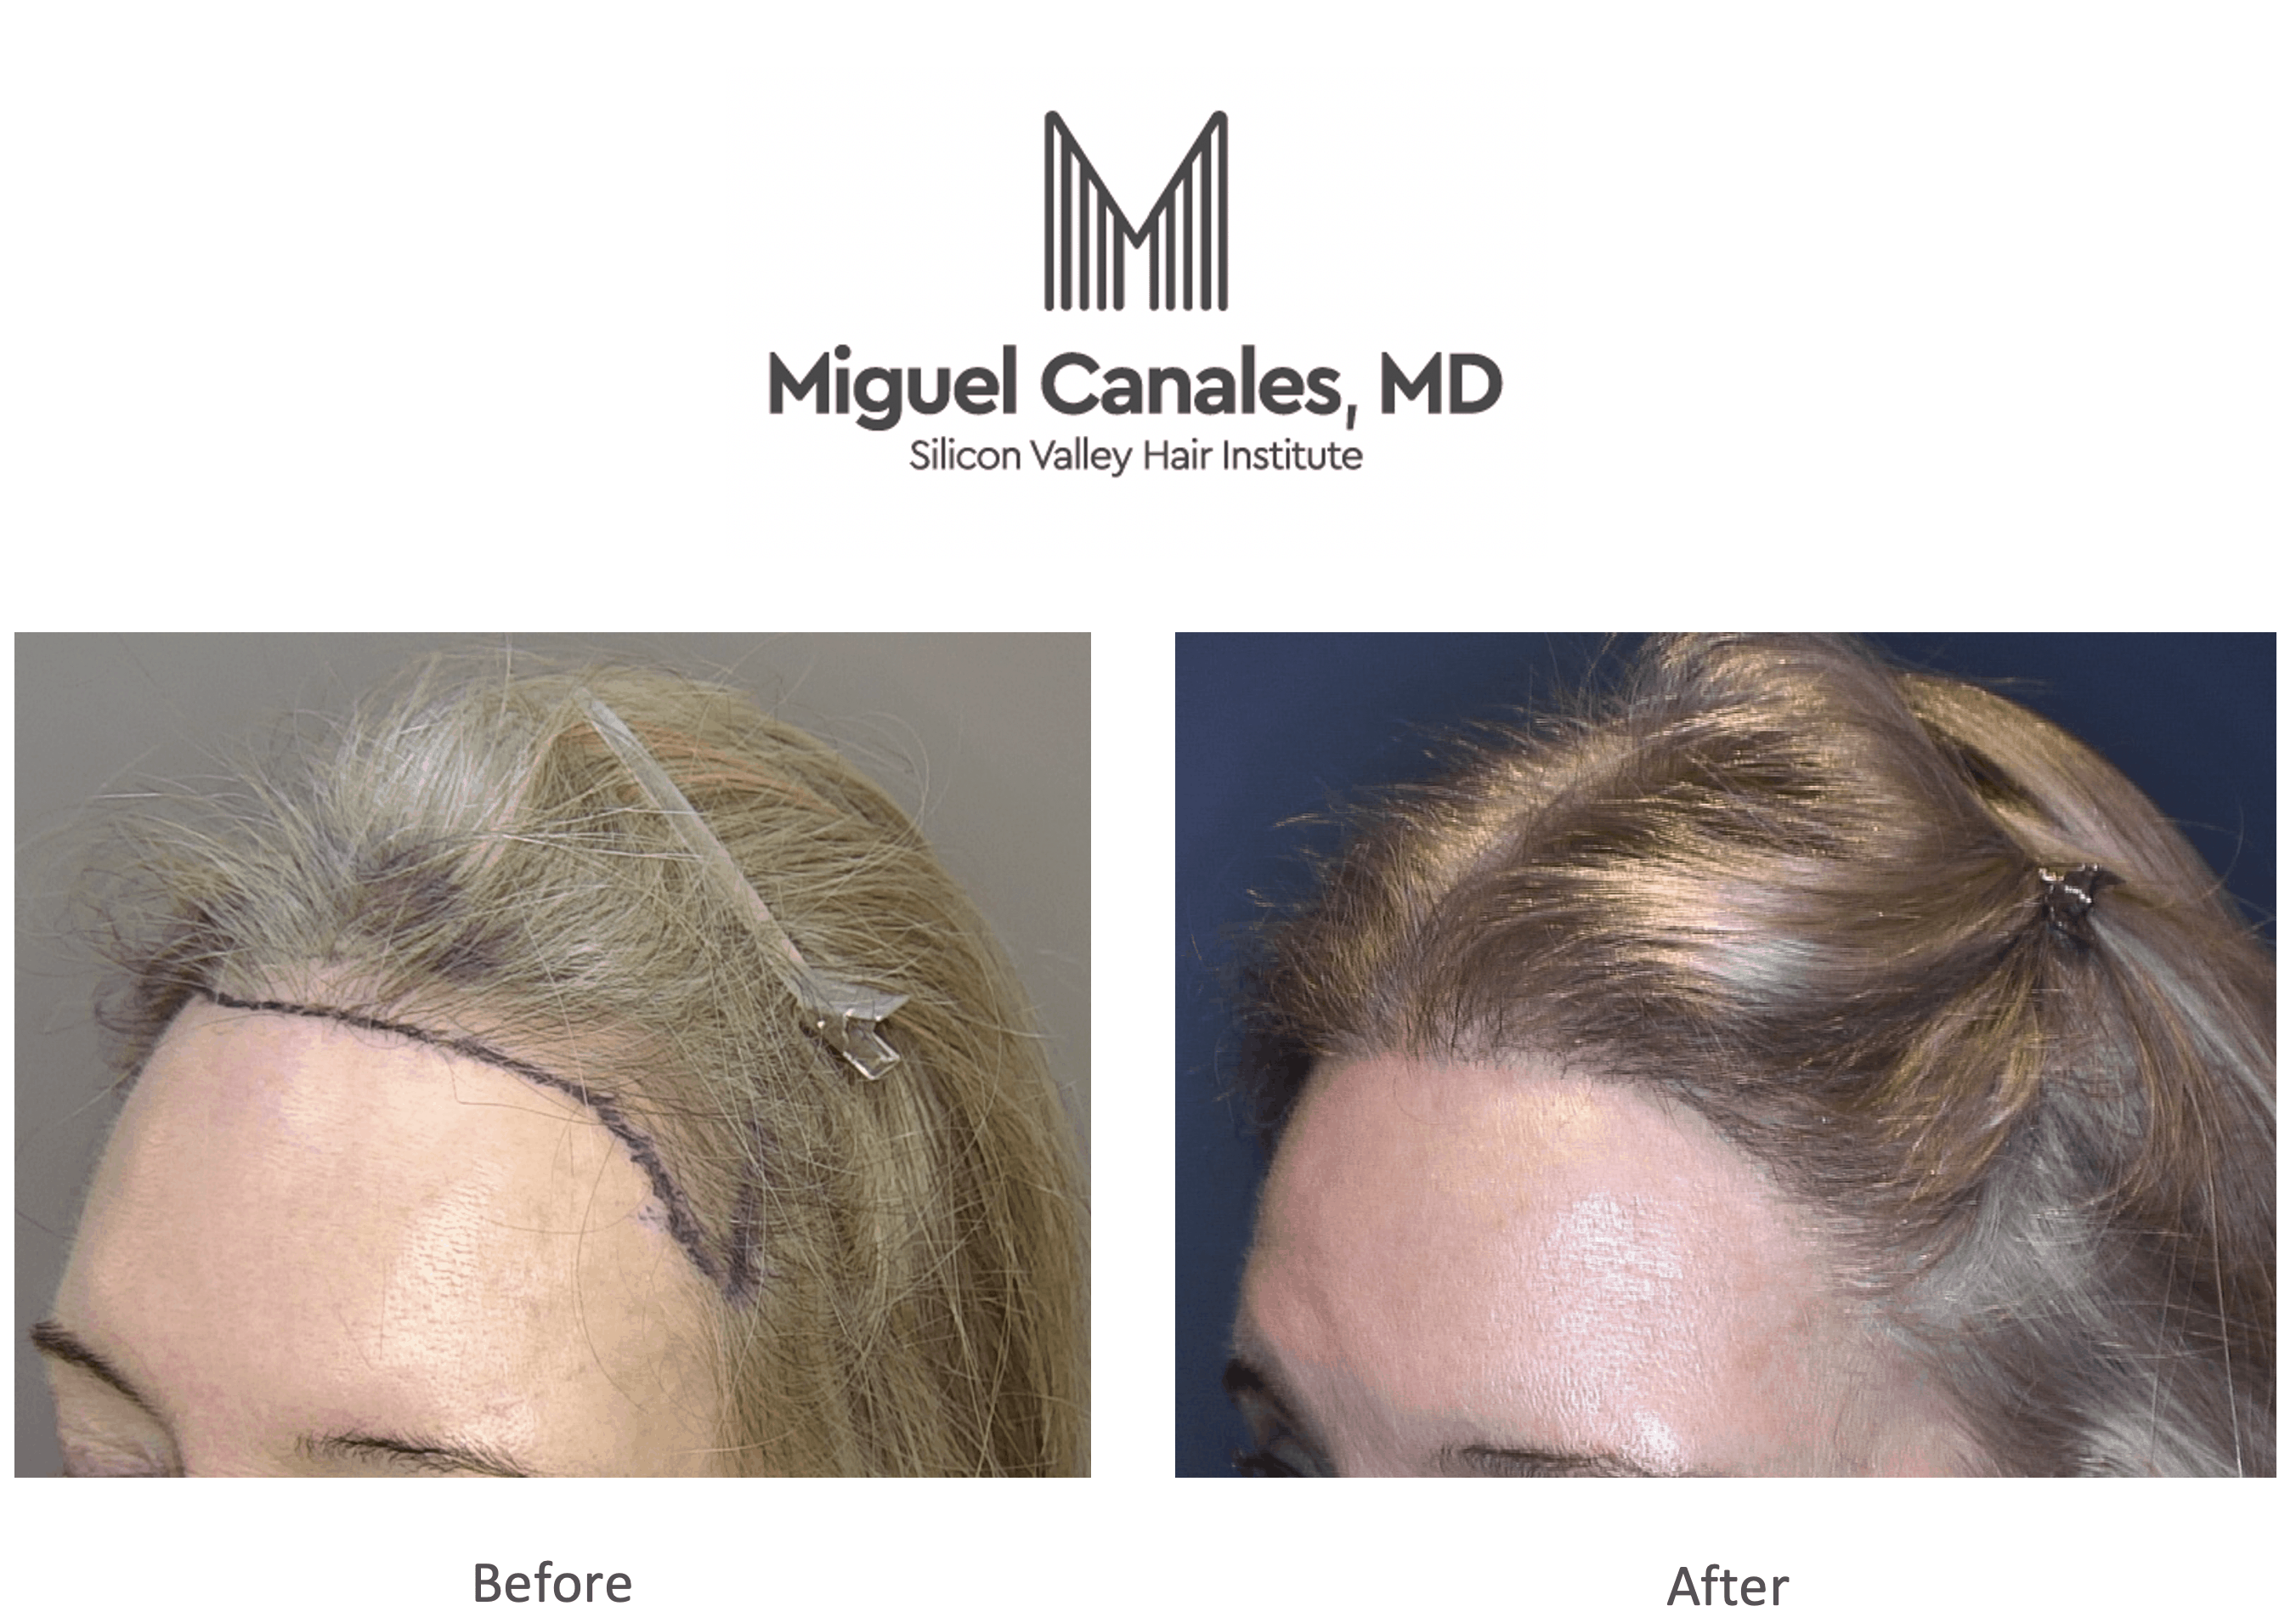 You May Need an Artas Hair Transplant, but Don't Understand What That Is -  Miguel Canales .